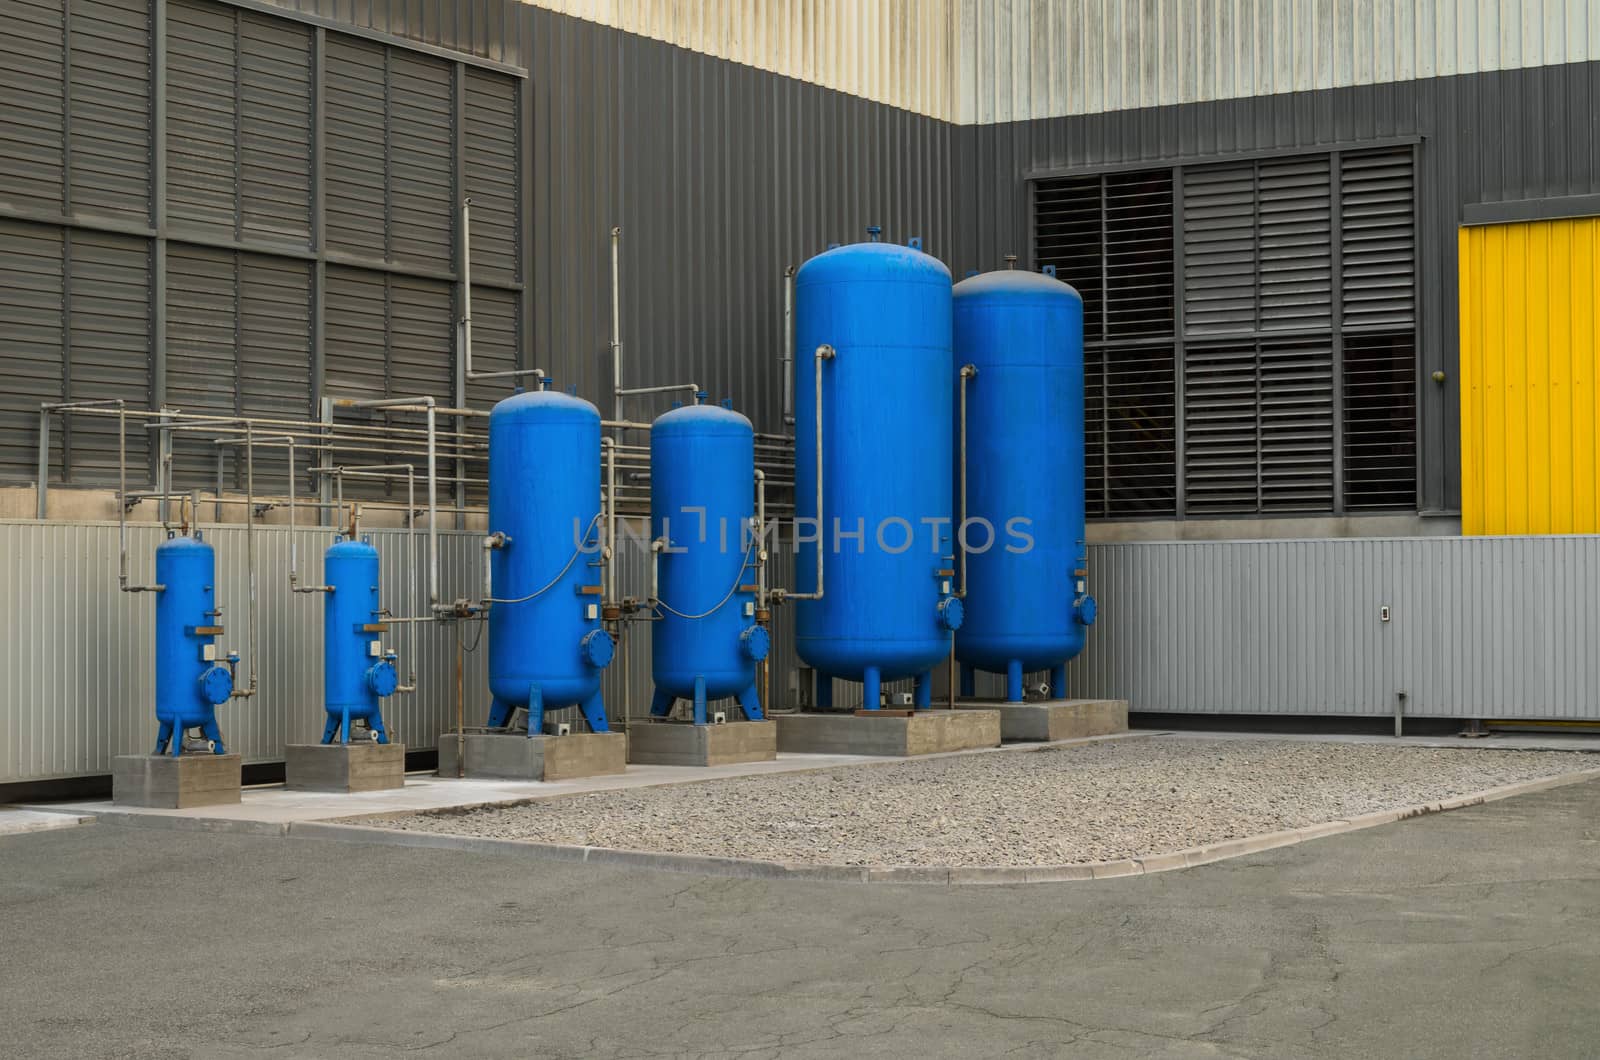 Industrial storage tanks for liquids, gases and bulk materials.